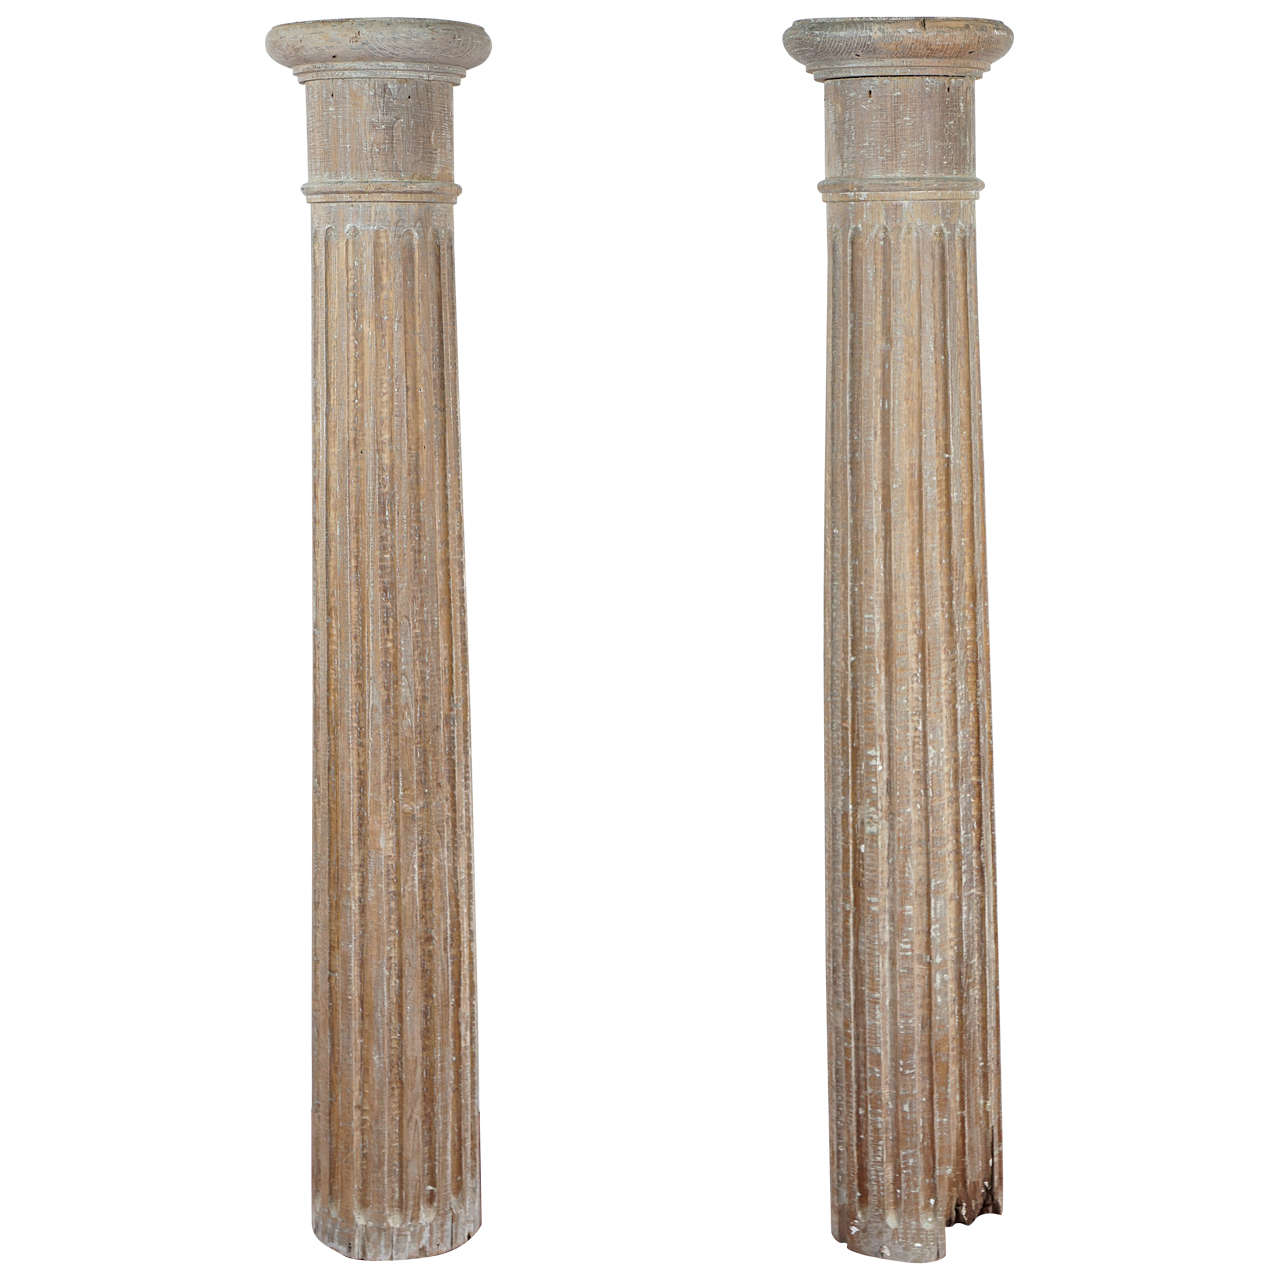 Pair of Classical Tuscan Wood Columns